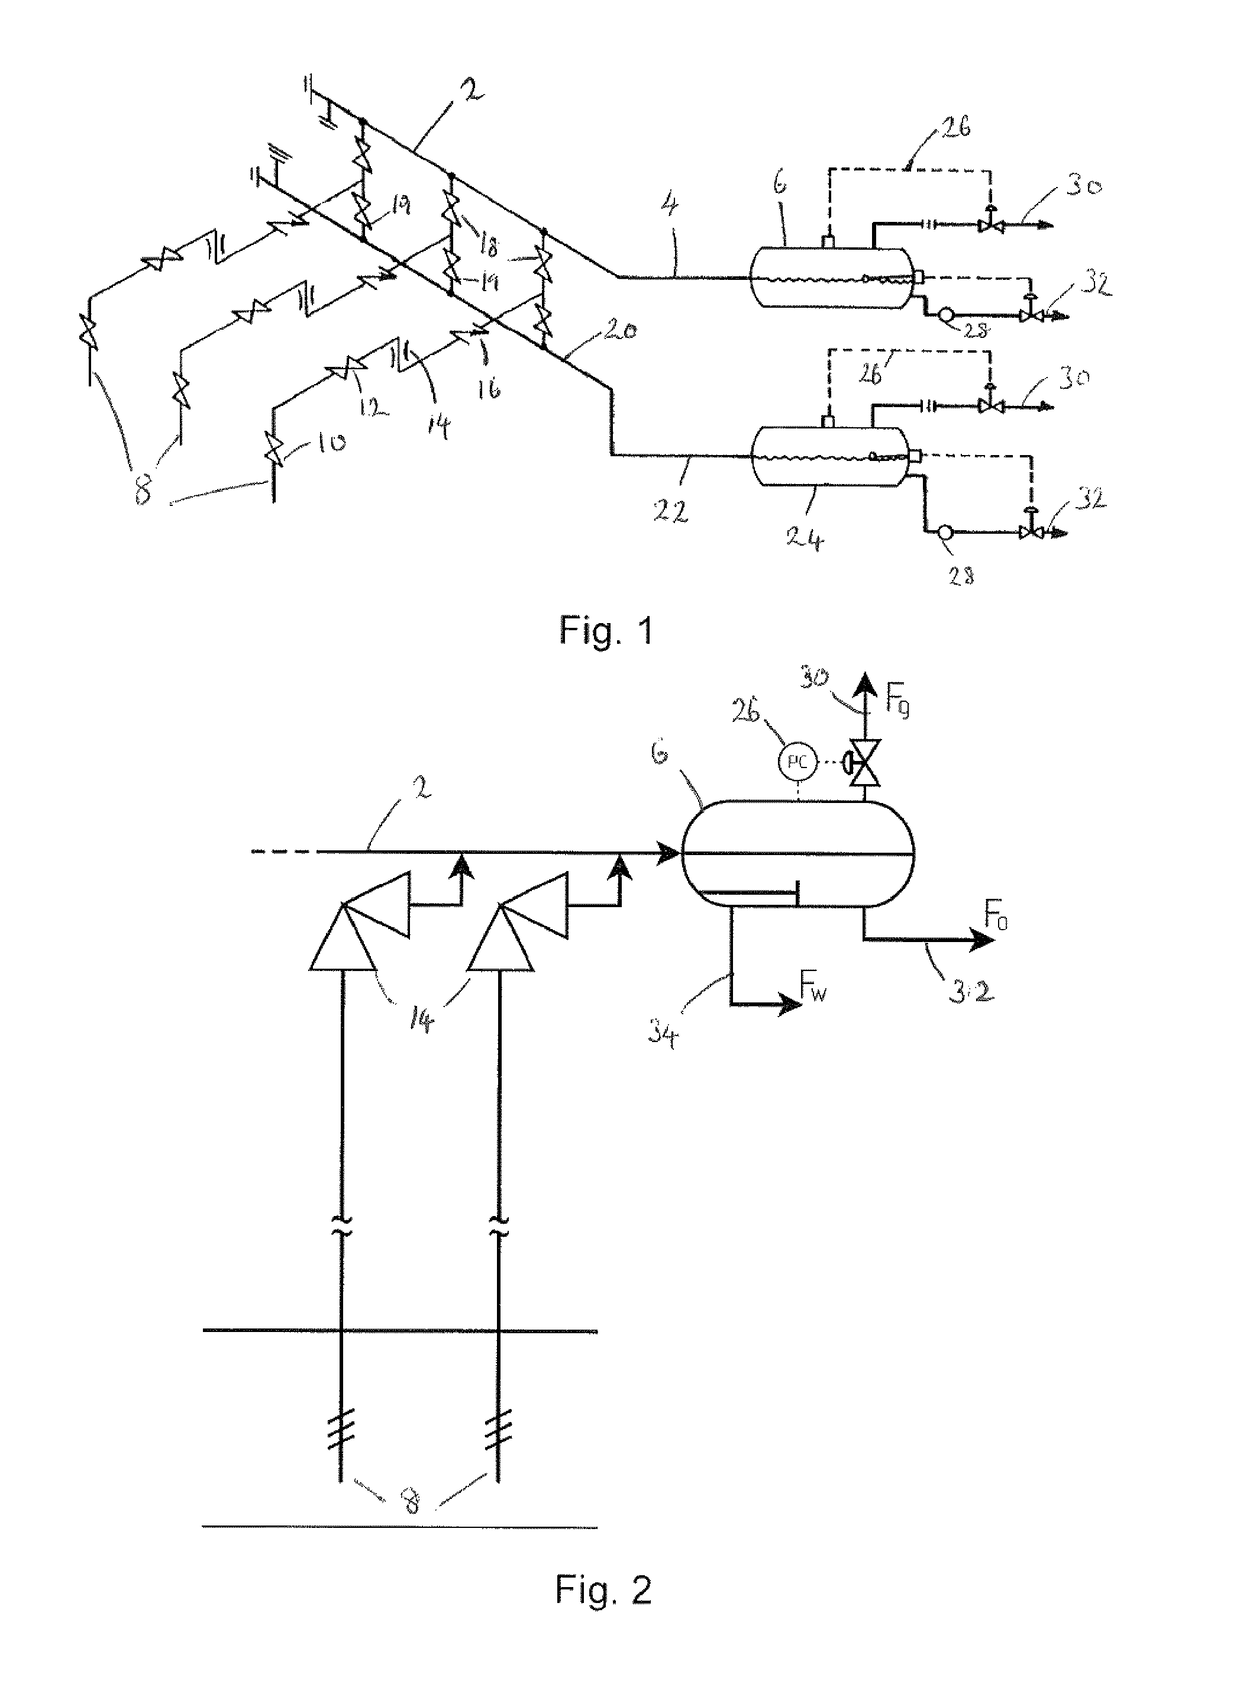 Well testing apparatus and methods for measuring the properties and performance of oil and gas wells